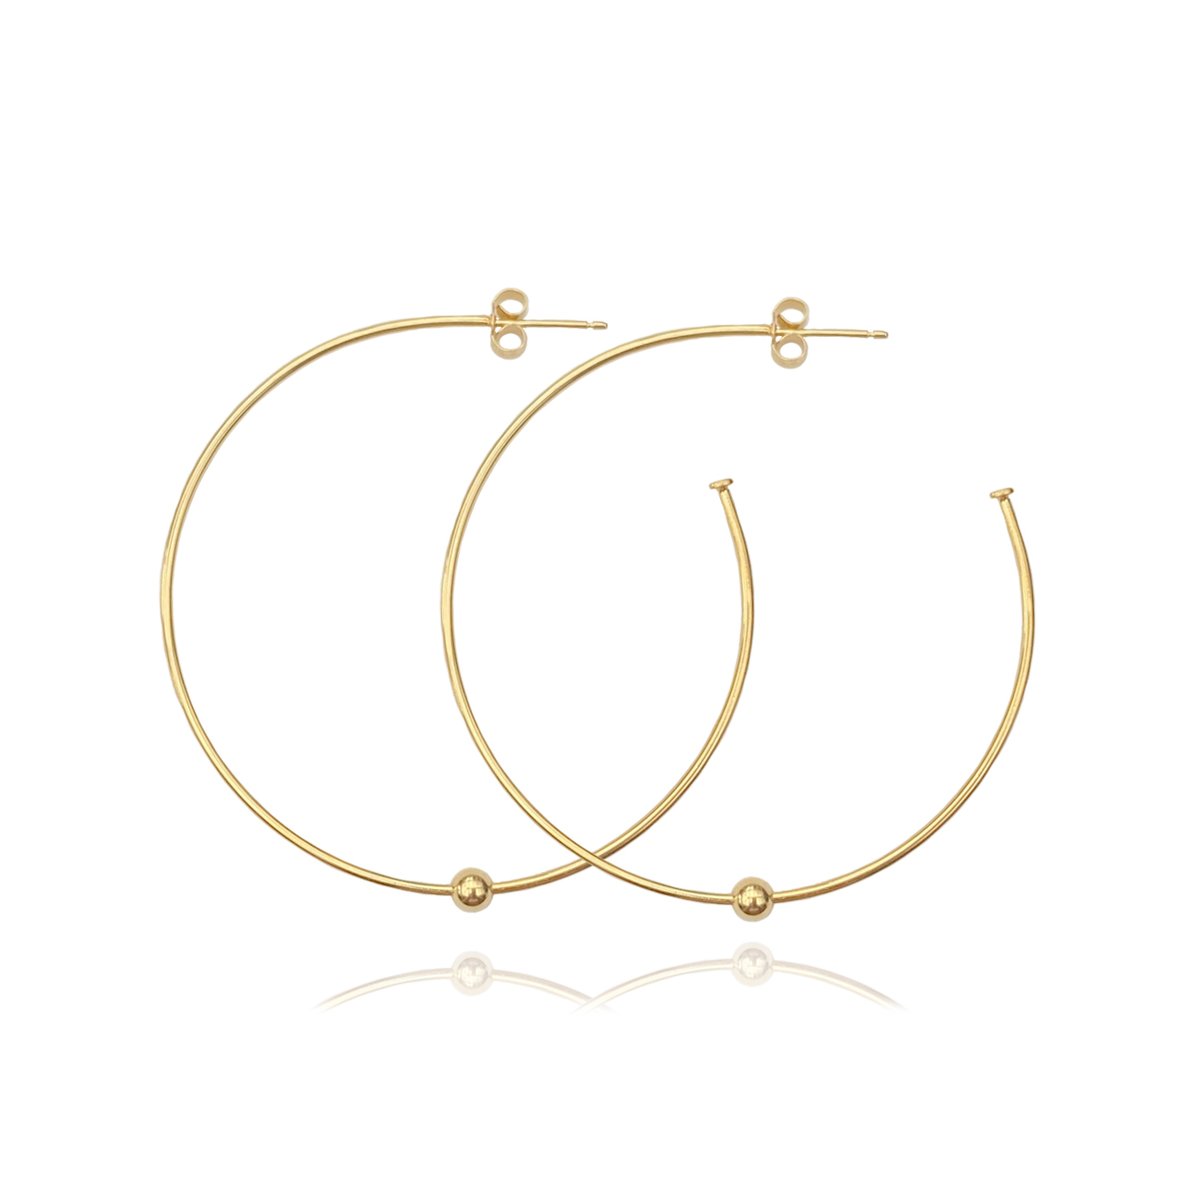 Image of Large gold hoops with a single bead